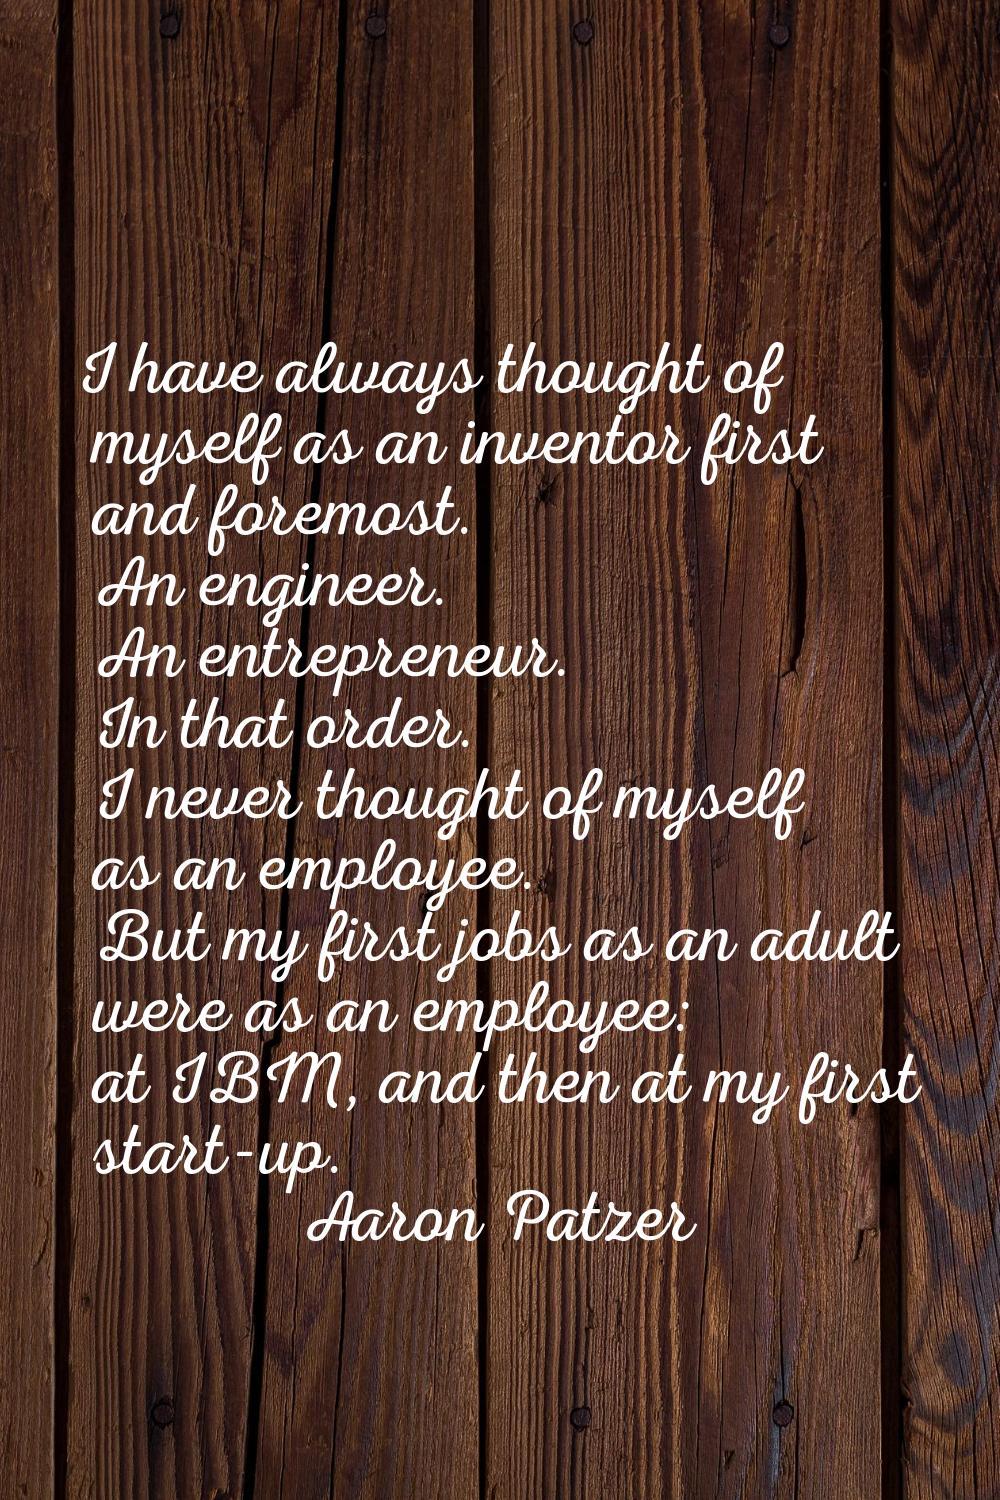 I have always thought of myself as an inventor first and foremost. An engineer. An entrepreneur. In